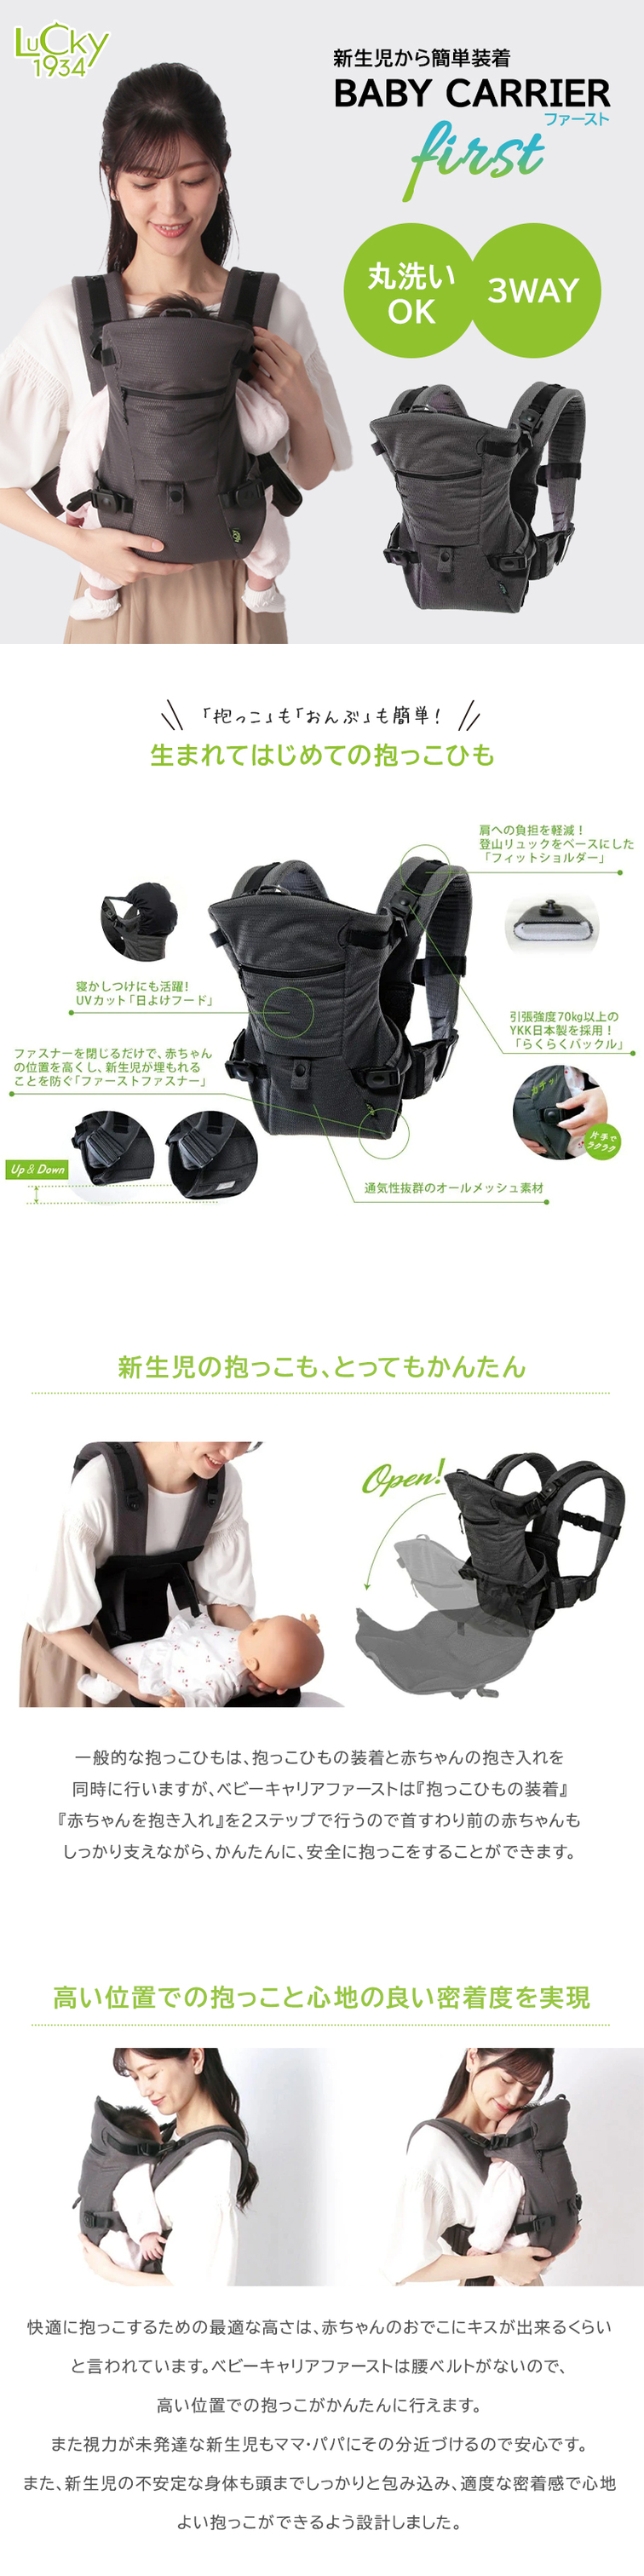 LUCKY 1934 ラッキー1934 BABY CARRIER FIRST ベビーキャリア